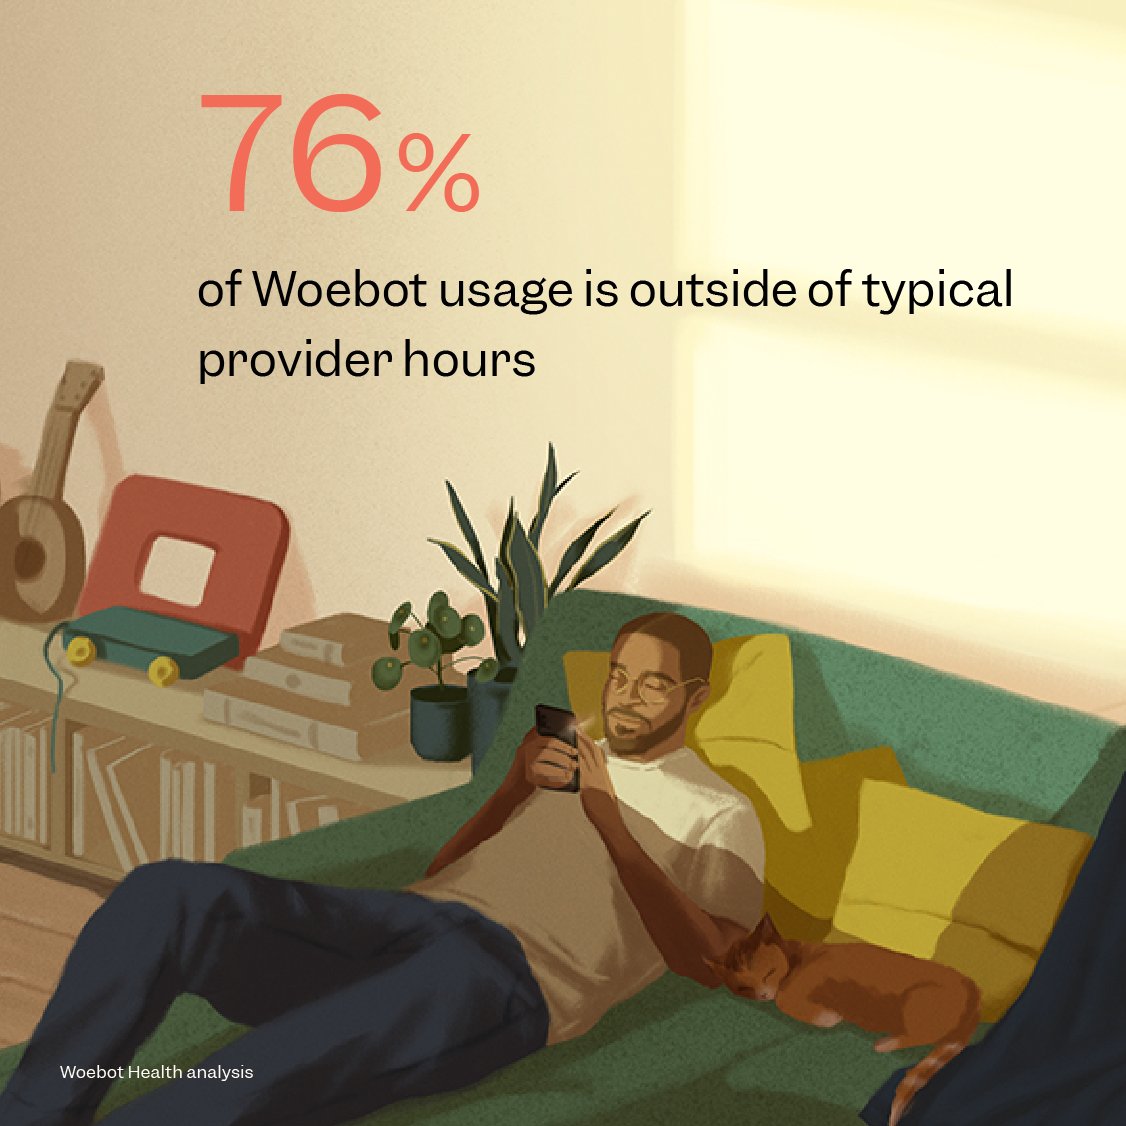 If mental health has no business hours, neither should support. Learn how Woebot can provide 24/7 emotional support to users wherever they are, whenever they need it bit.ly/3PflR71 #MentalHealth #DigitalHealth